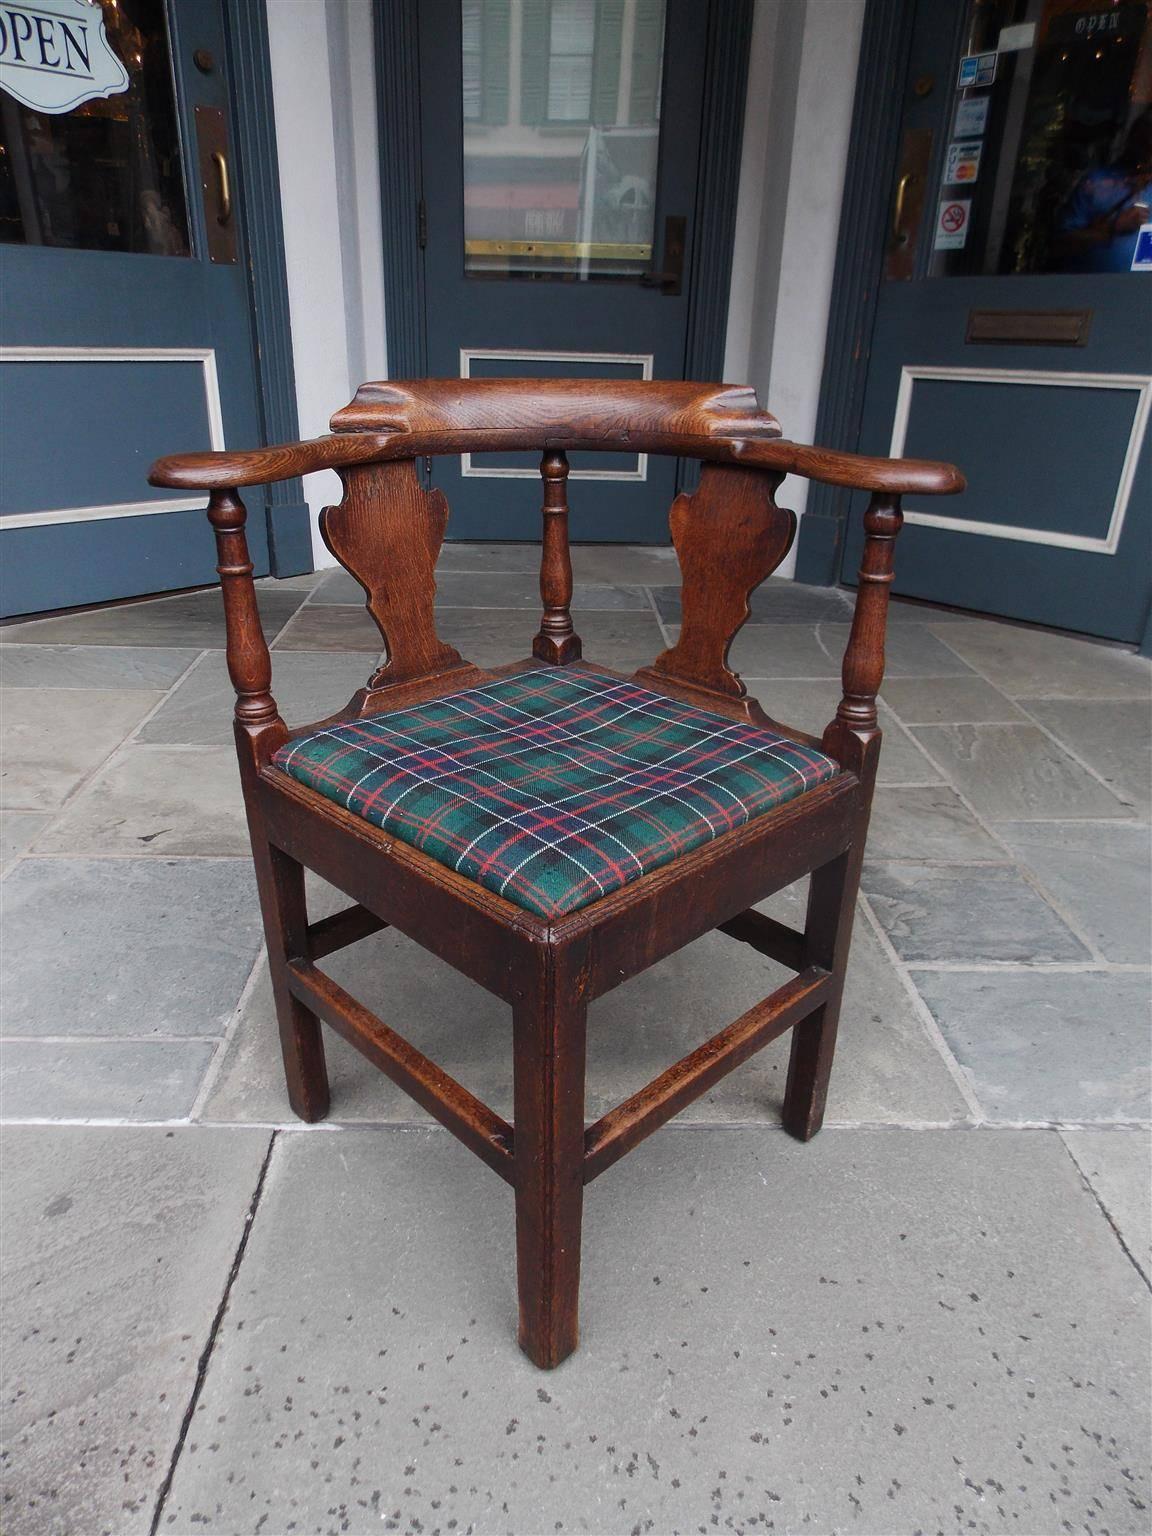 English Chippendale oak corner chair with a carved molded centered edge, flanking carved splat backs, scrolled outset rounded arms, turned bulbous ringed columns and terminating on the original squared legs with connecting stretchers. Chair has the